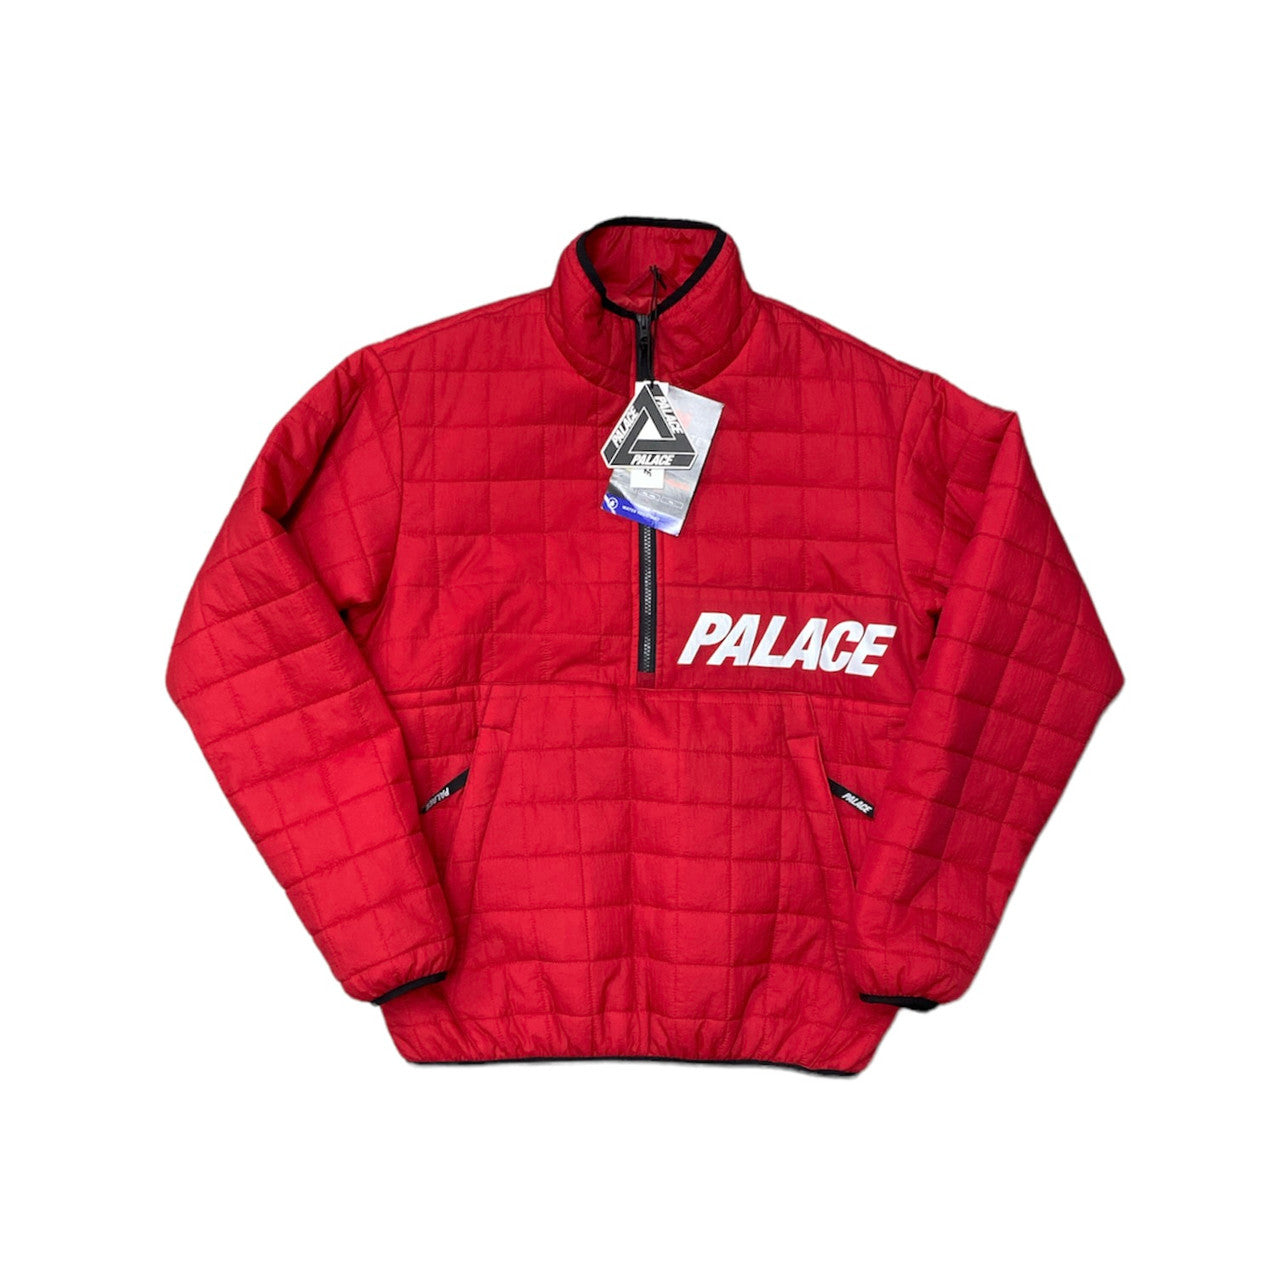 Palace Armour Half Zip Water Resistant Pullover Jacket